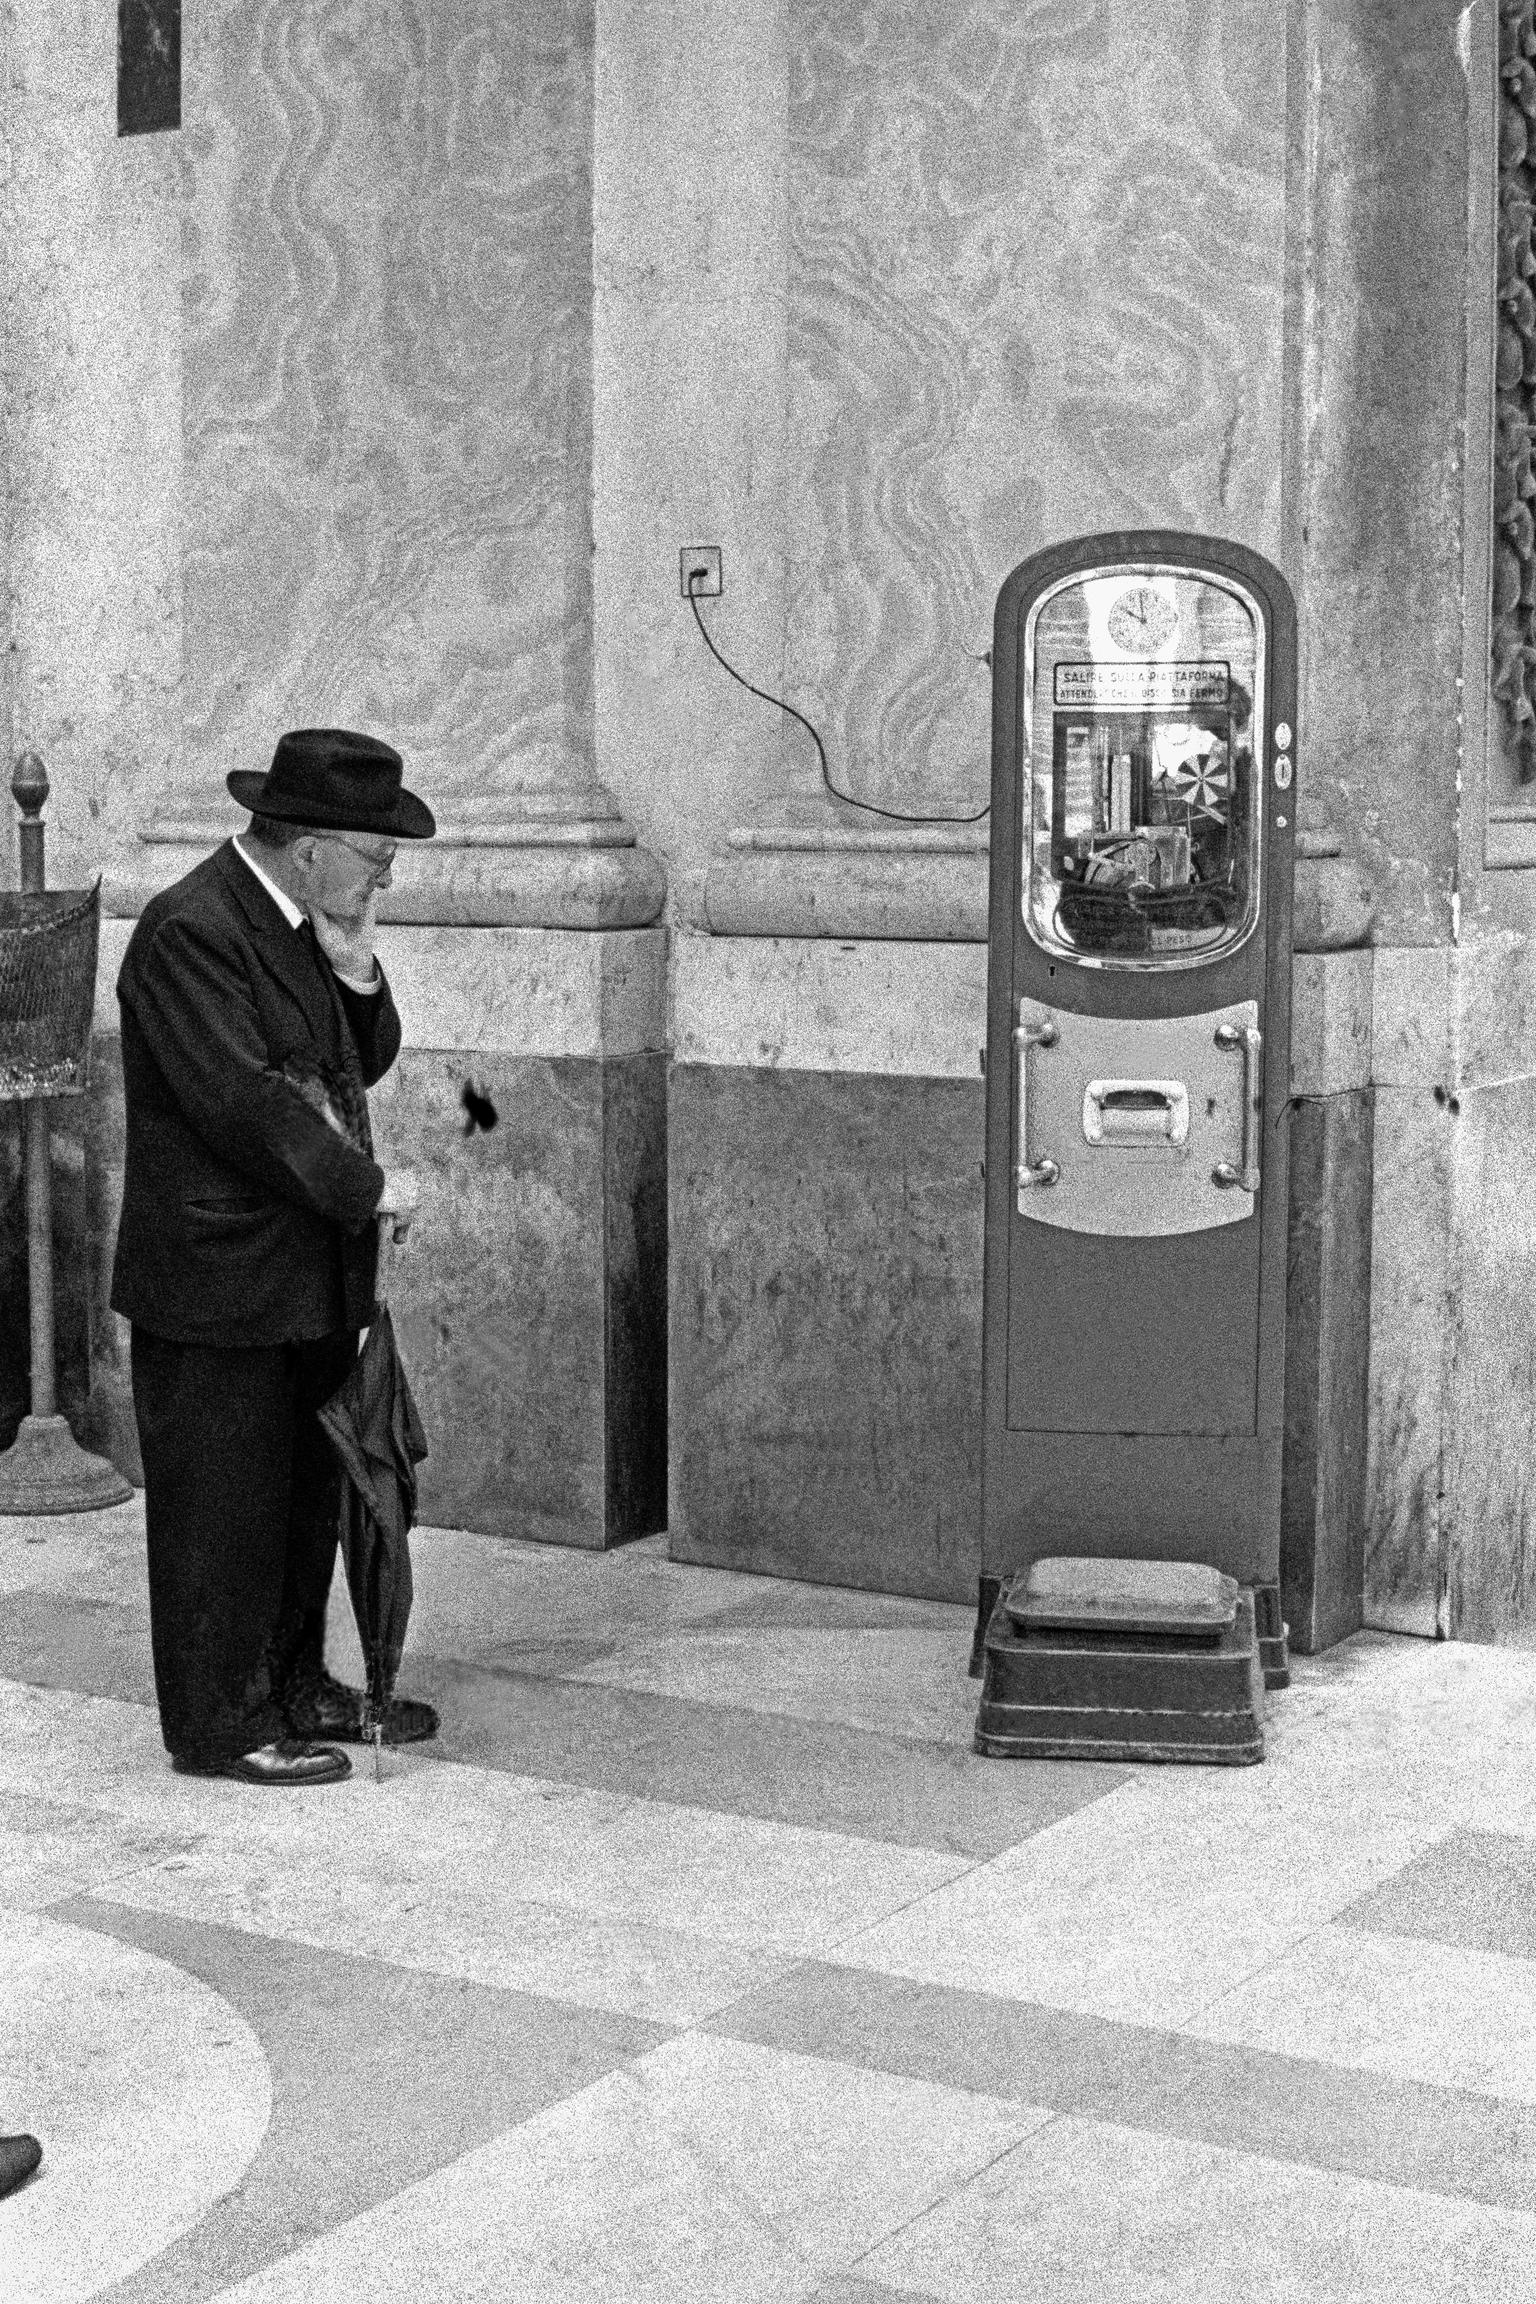 Weighing machine plus thoughtful observer. Naples. Italy